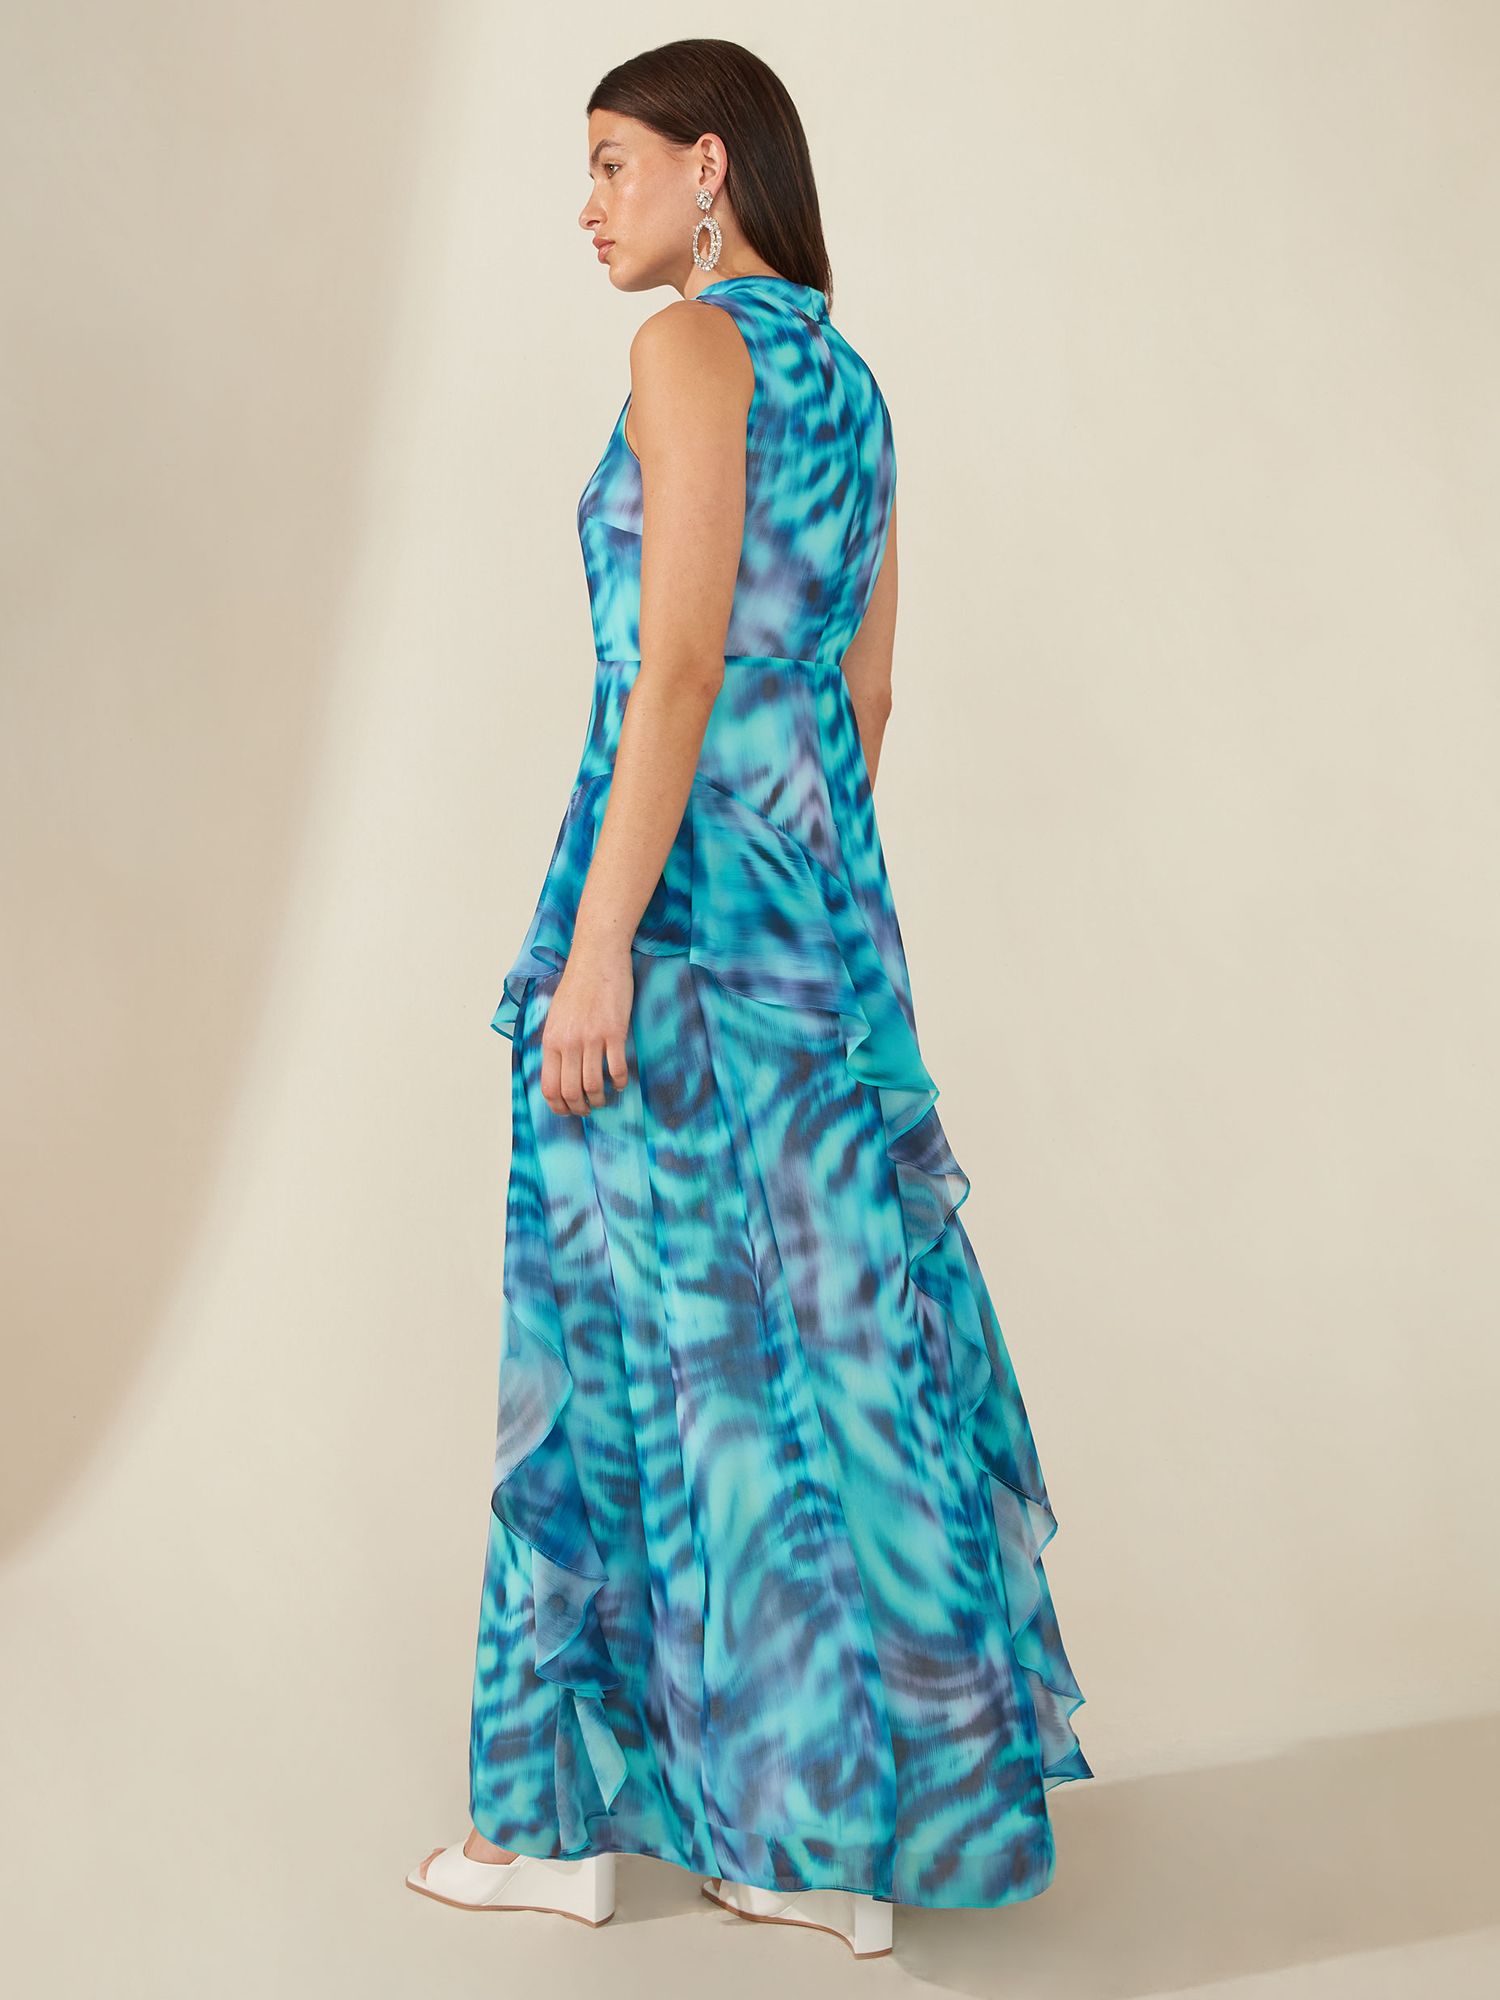 Ro&Zo Frill High Neck Maxi Dress, Turquoise at John Lewis & Partners